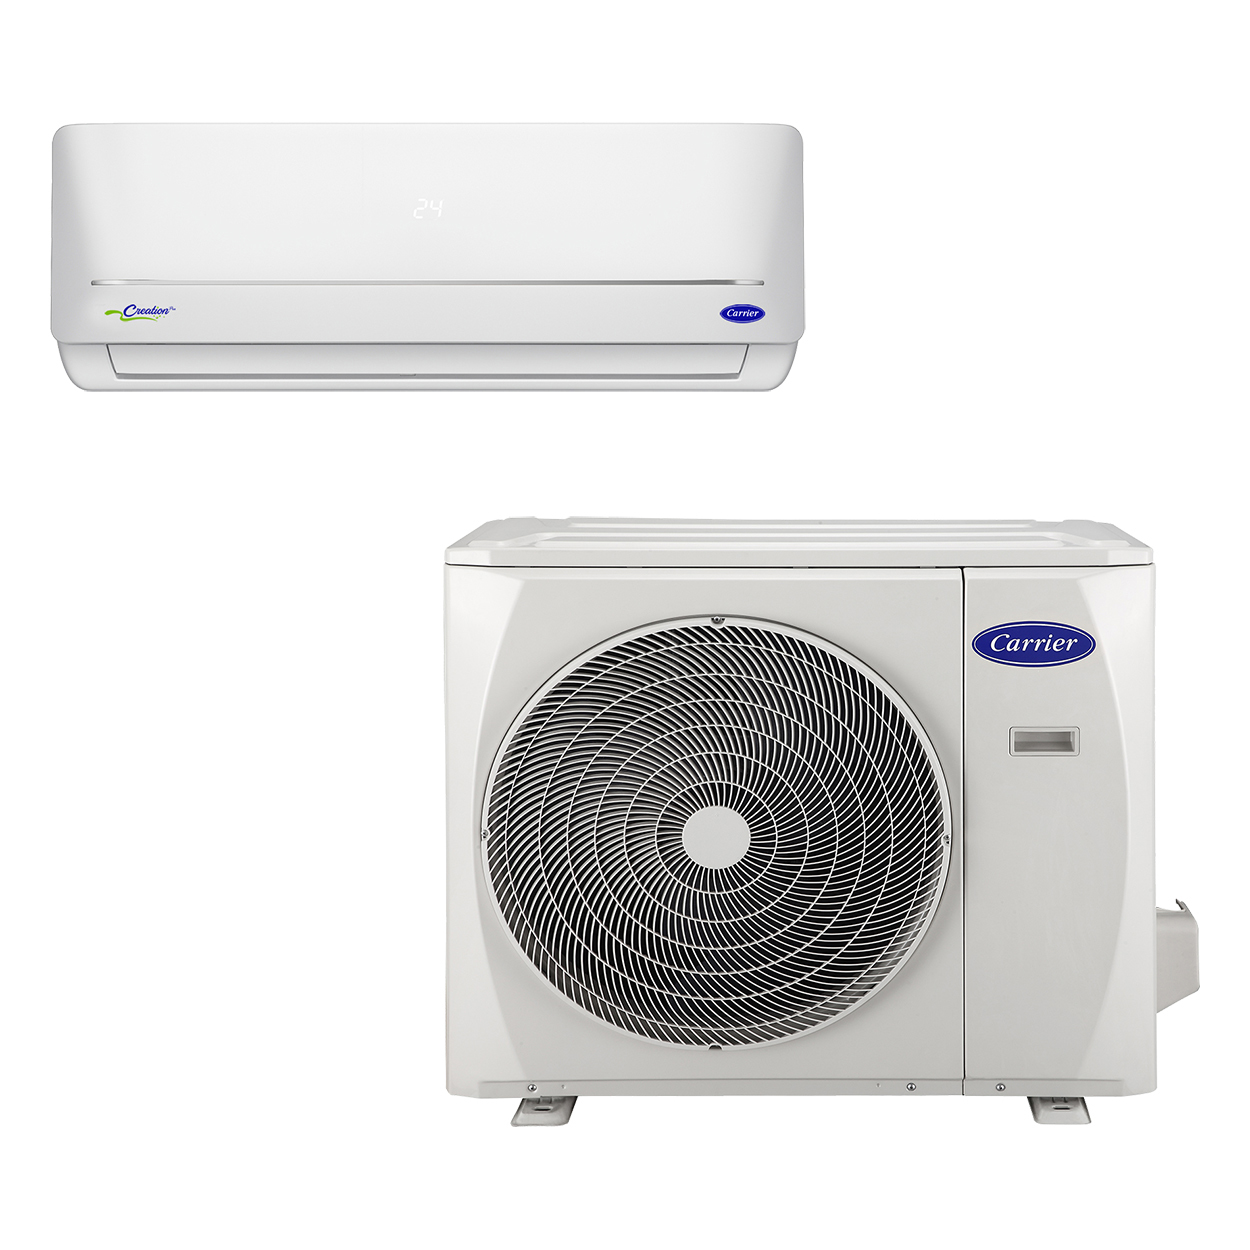 carrier-creation-pro-ductless-system.jpg